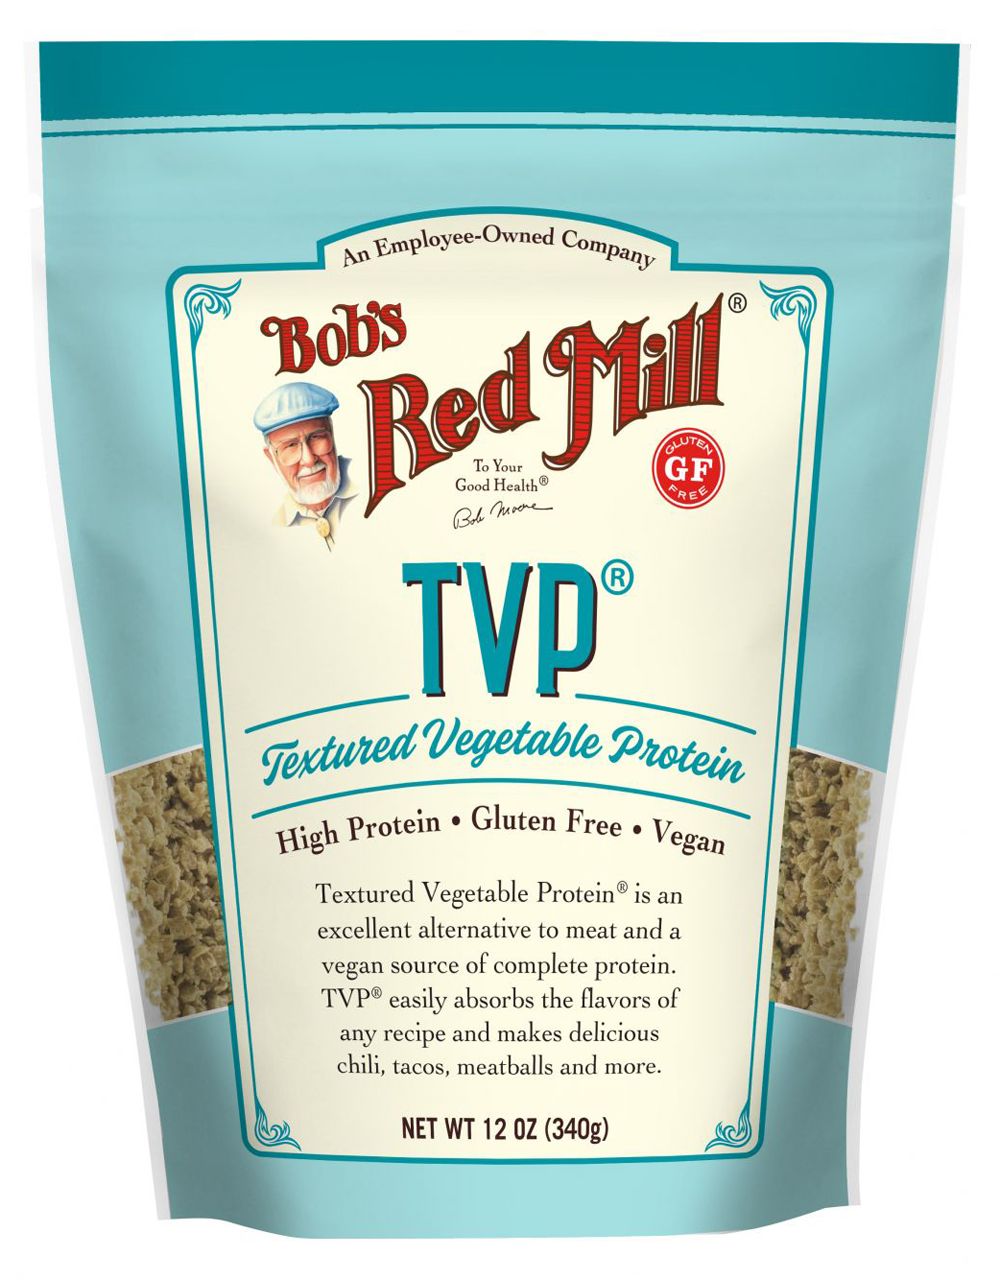 For pokker nevø Glow Bob's Red Mill Textured Vegetable Protein 12 oz. by Bob's Red Mill -  Exclusive Offer at $4.49 on Netrition